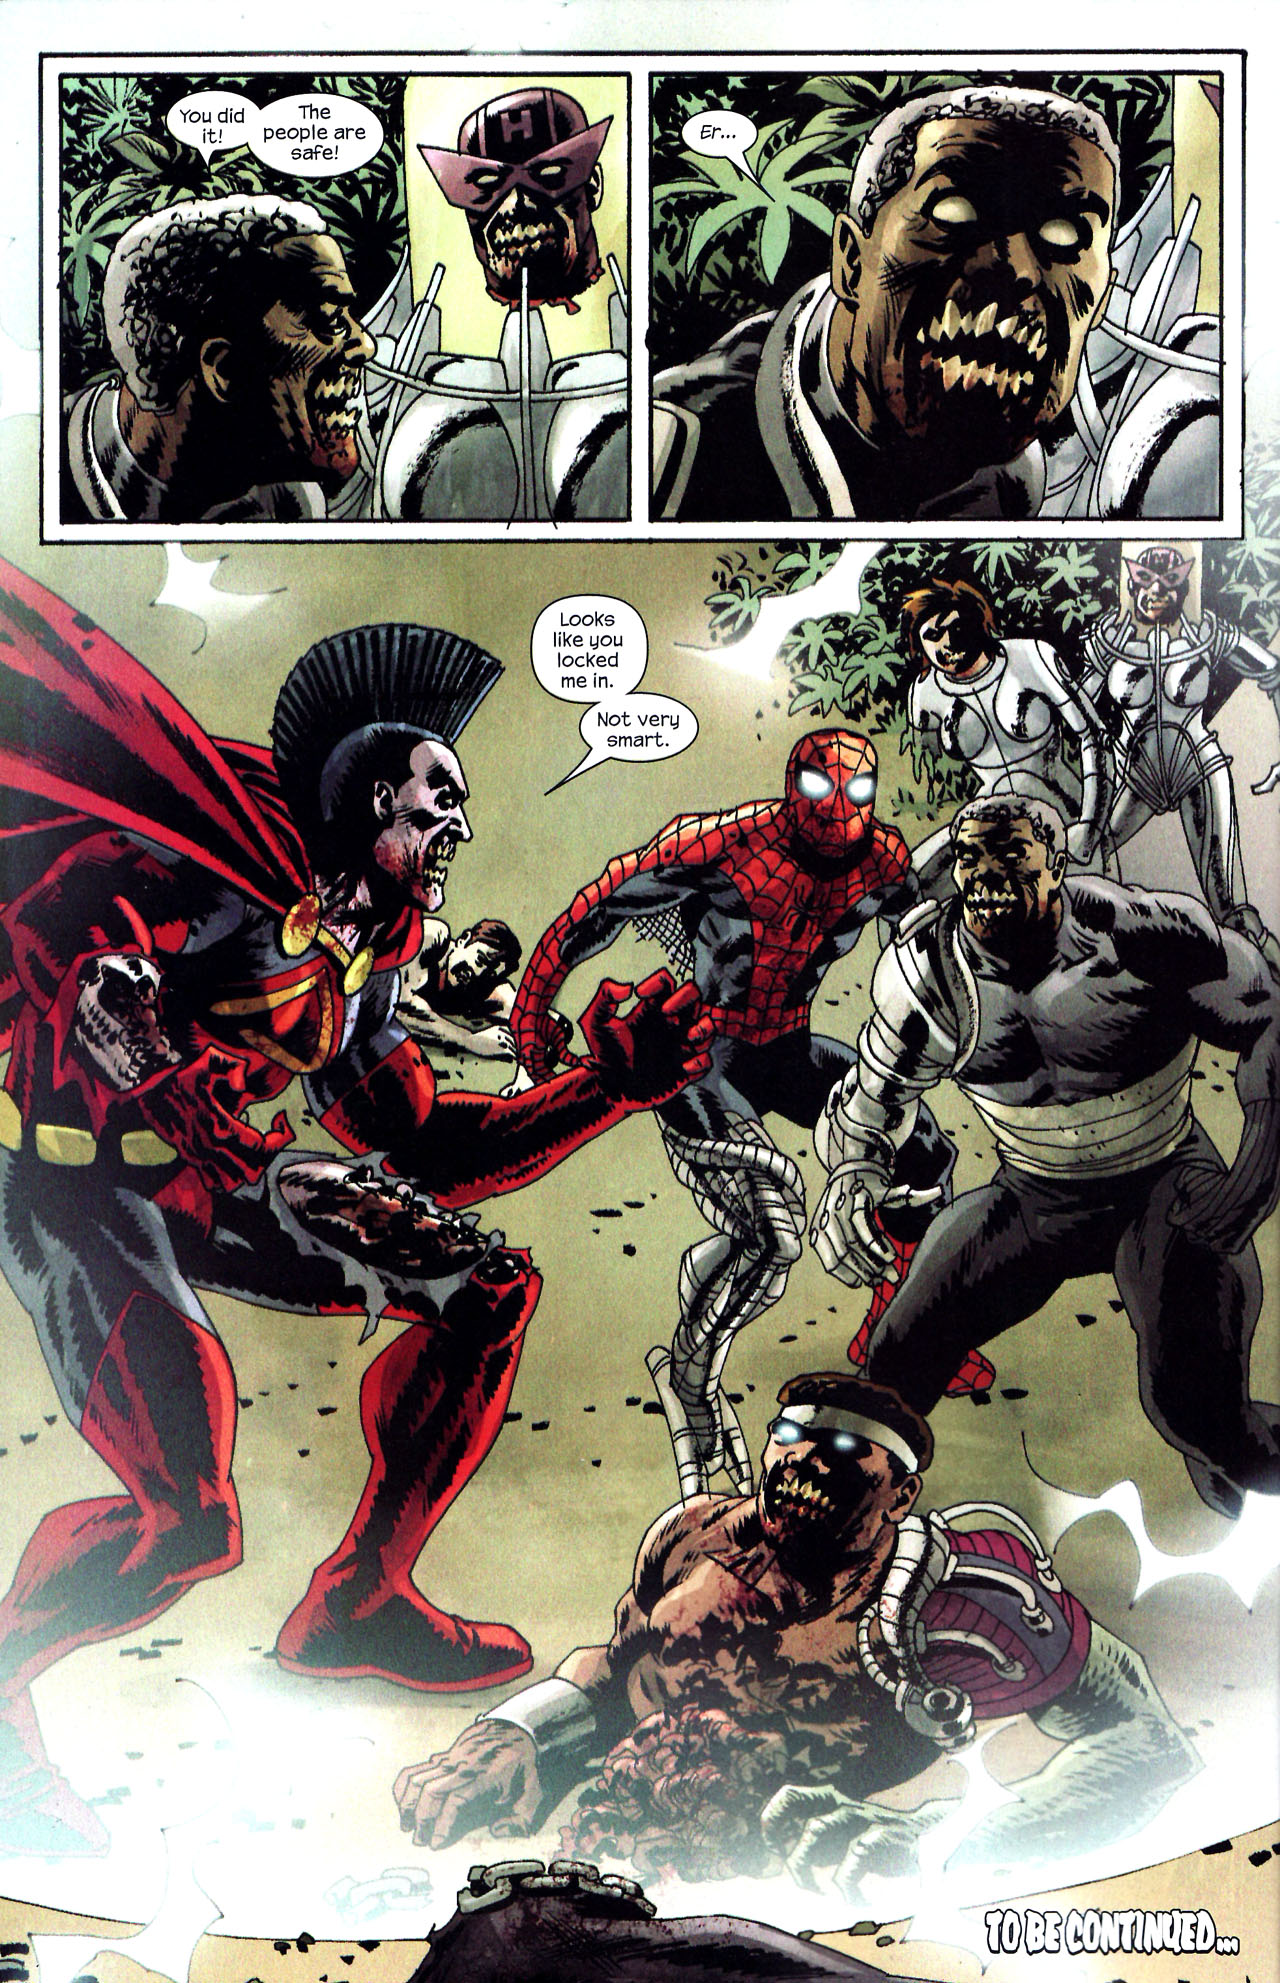 Marvel Zombies 2 - 2 of 5